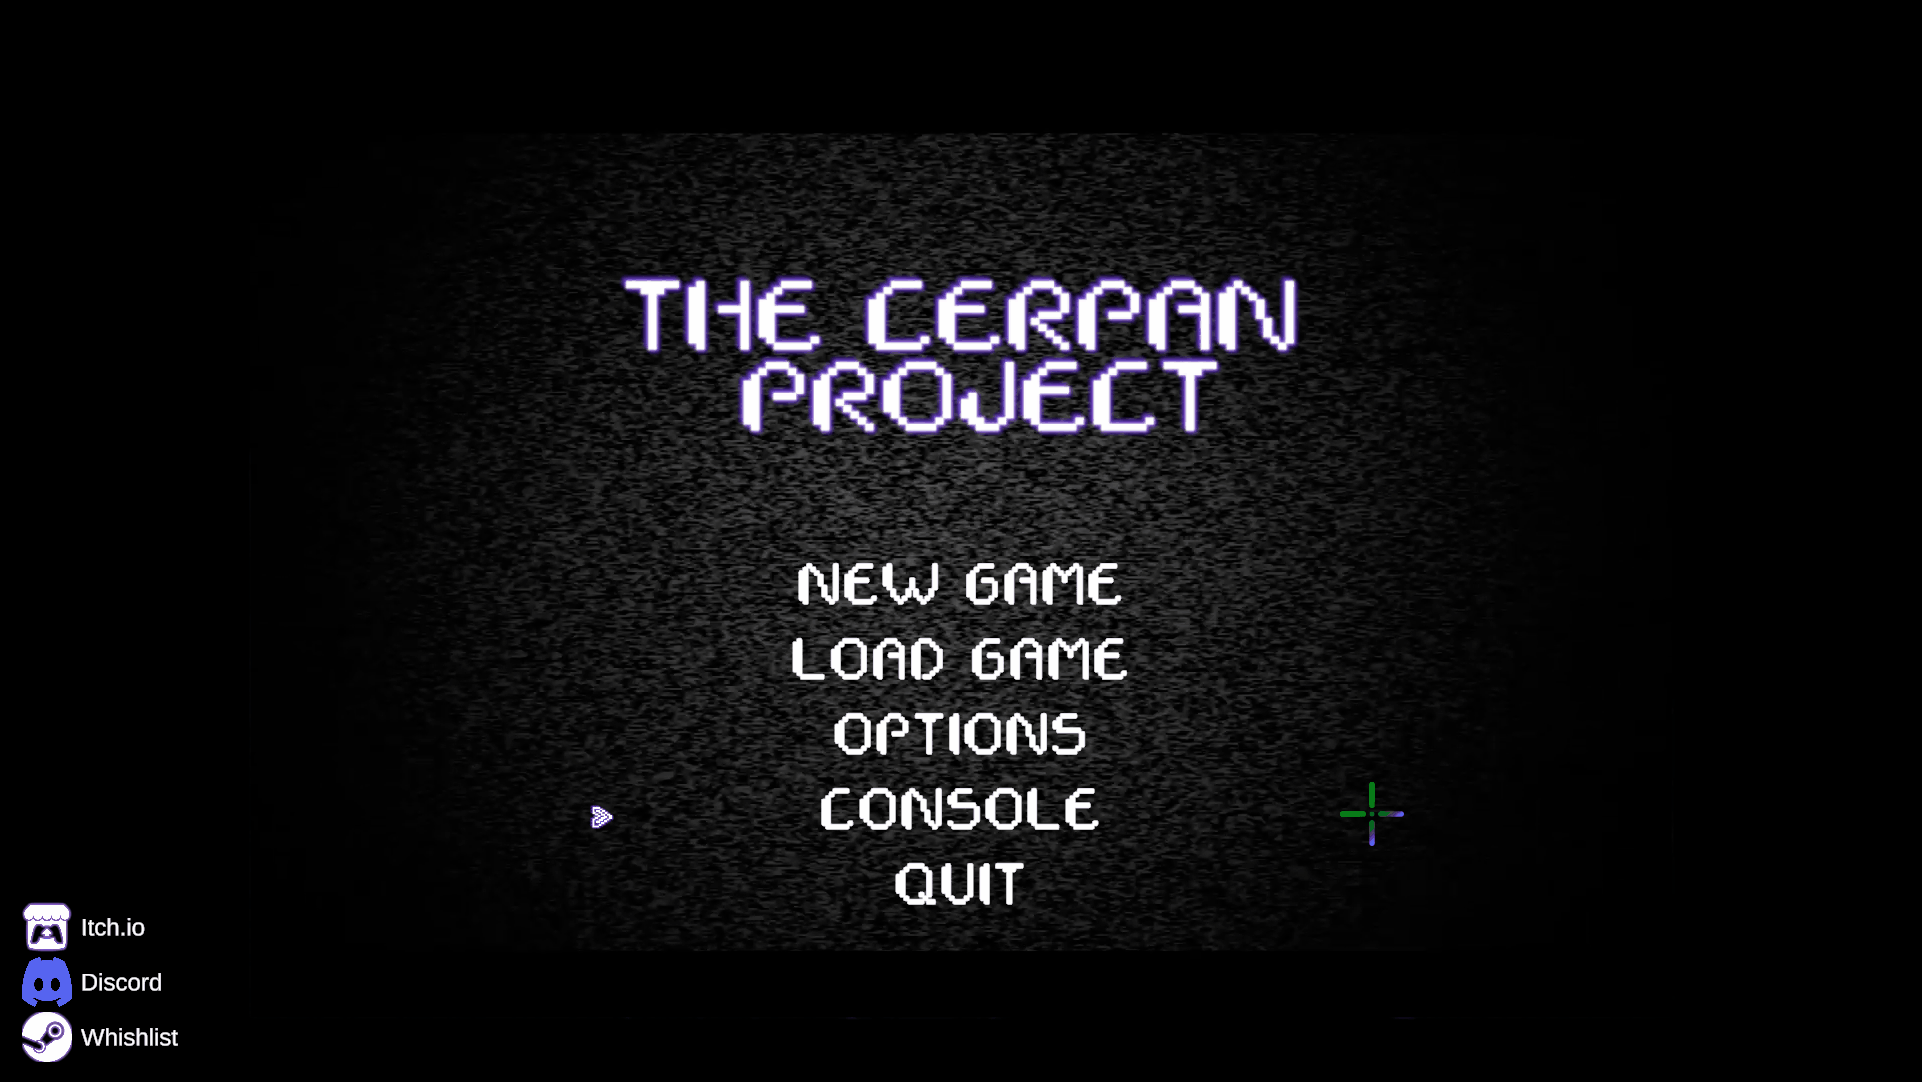 TheCerpanProjectConsole